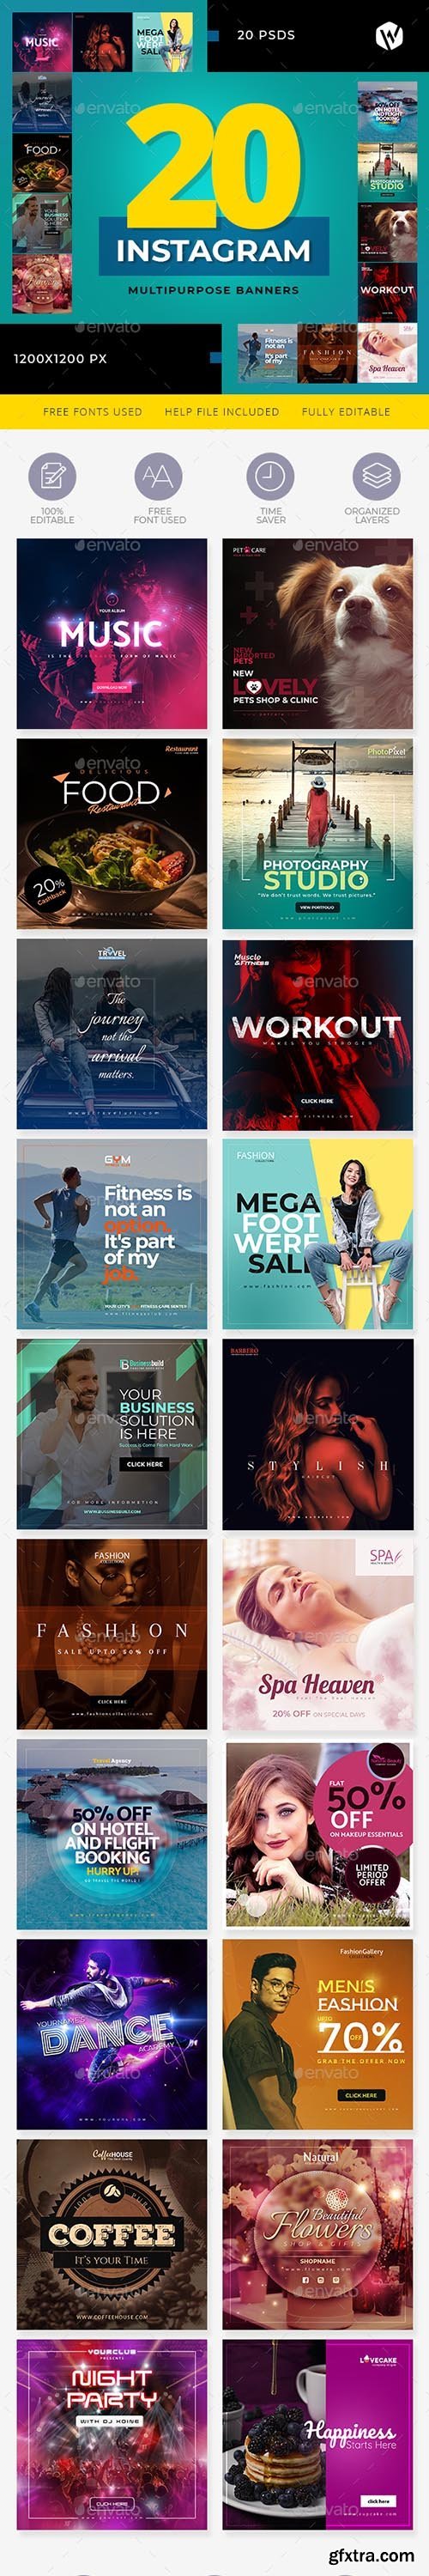 GraphicRiver - 20 Instagram Banners 27718234